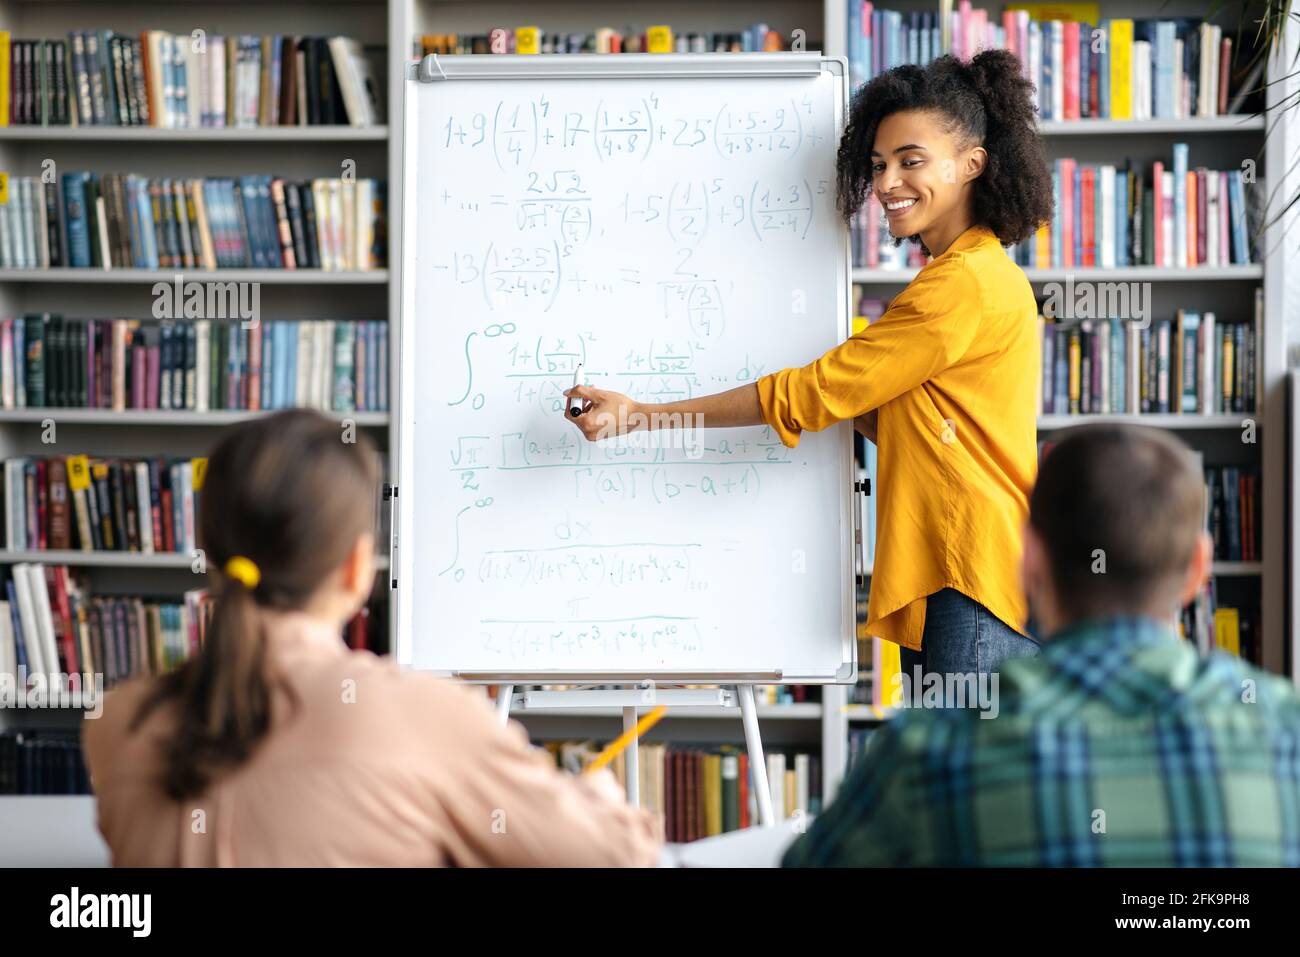 Attentive smart students listen to young mixed race woman teacher standing by whiteboard, wearing stylish clothes, is conducts lesson, brainstorm, shows information and smiling Stock Photo